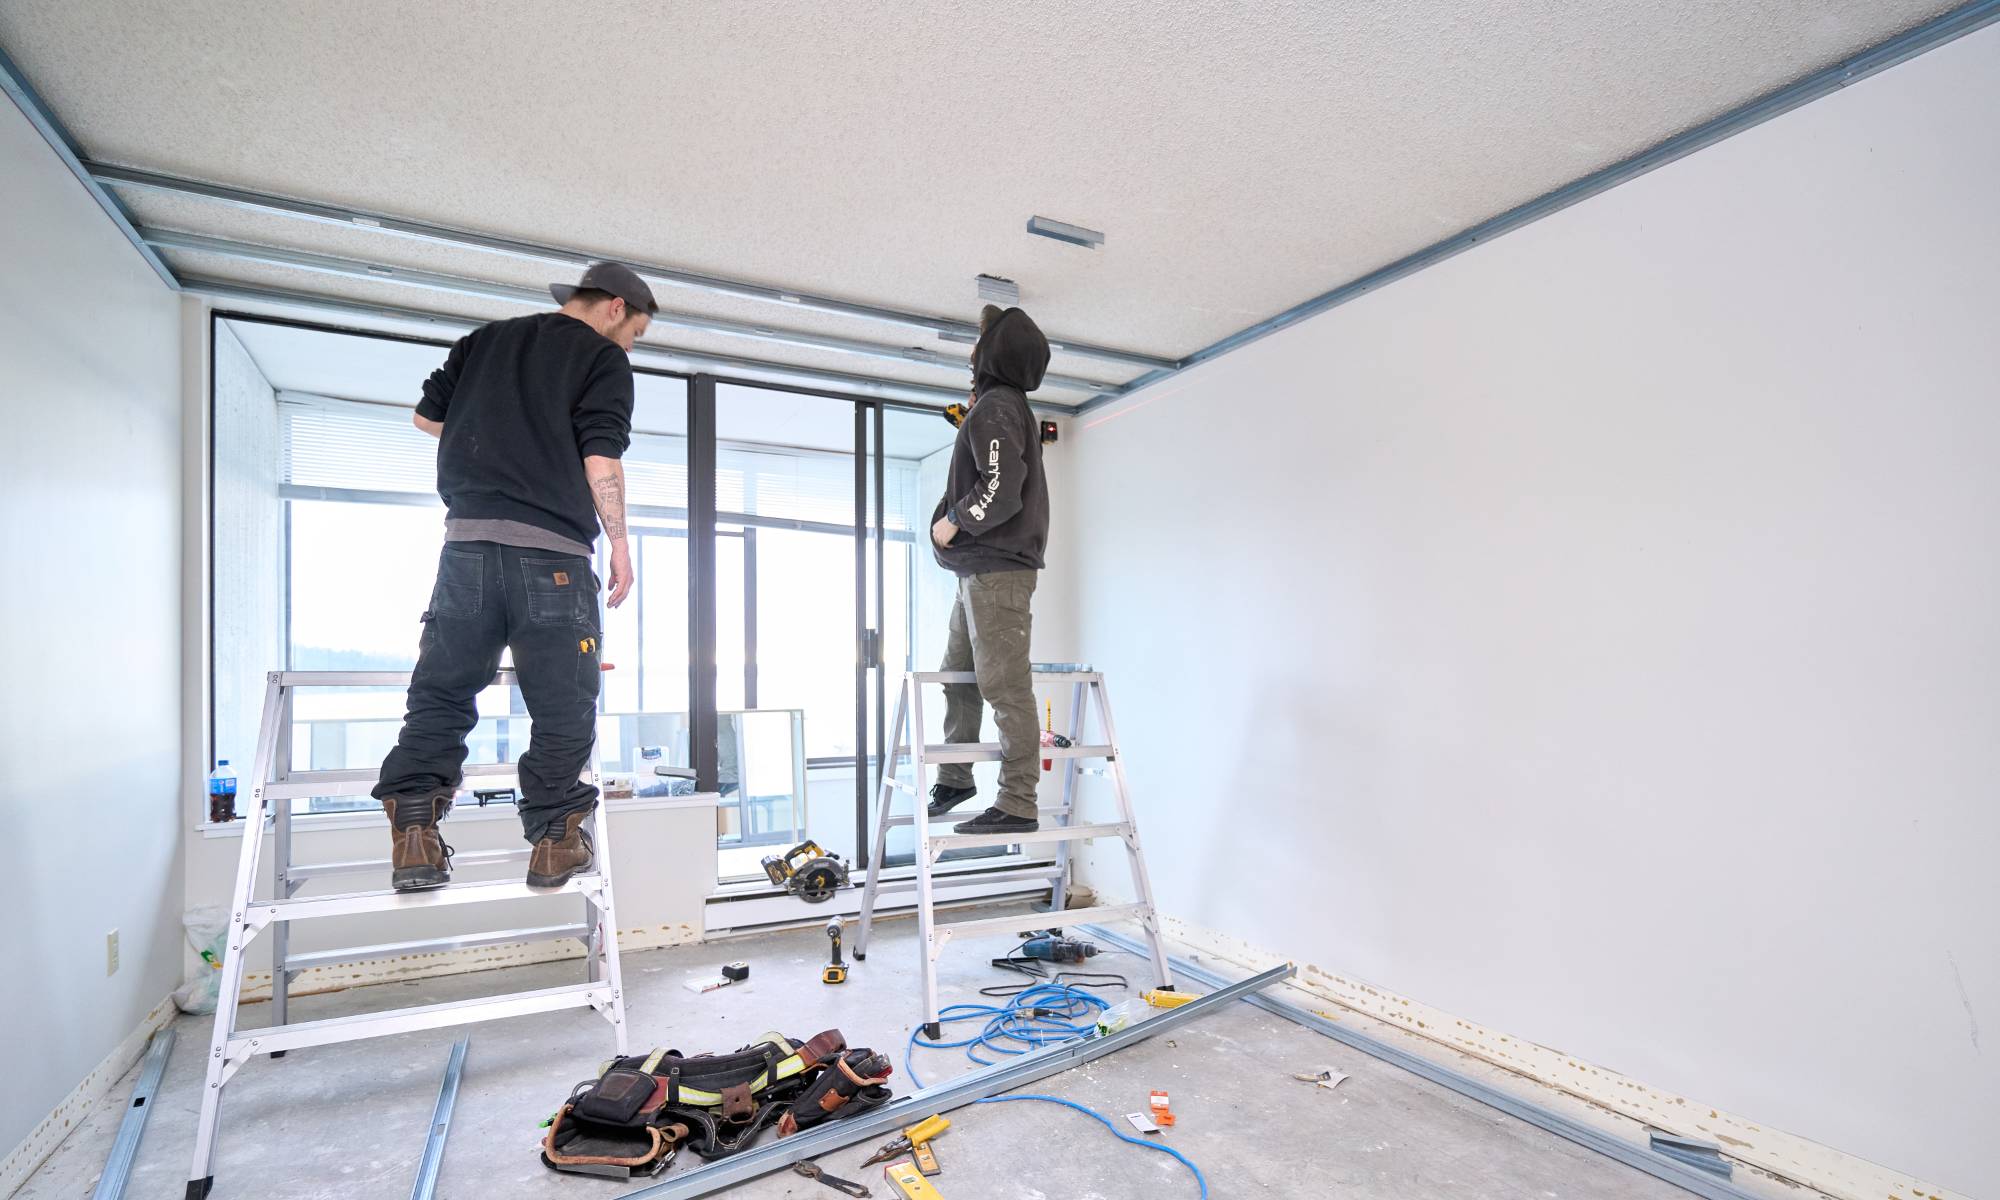 How to Find a Quality Vancouver Contractor for Your Remodeling Project